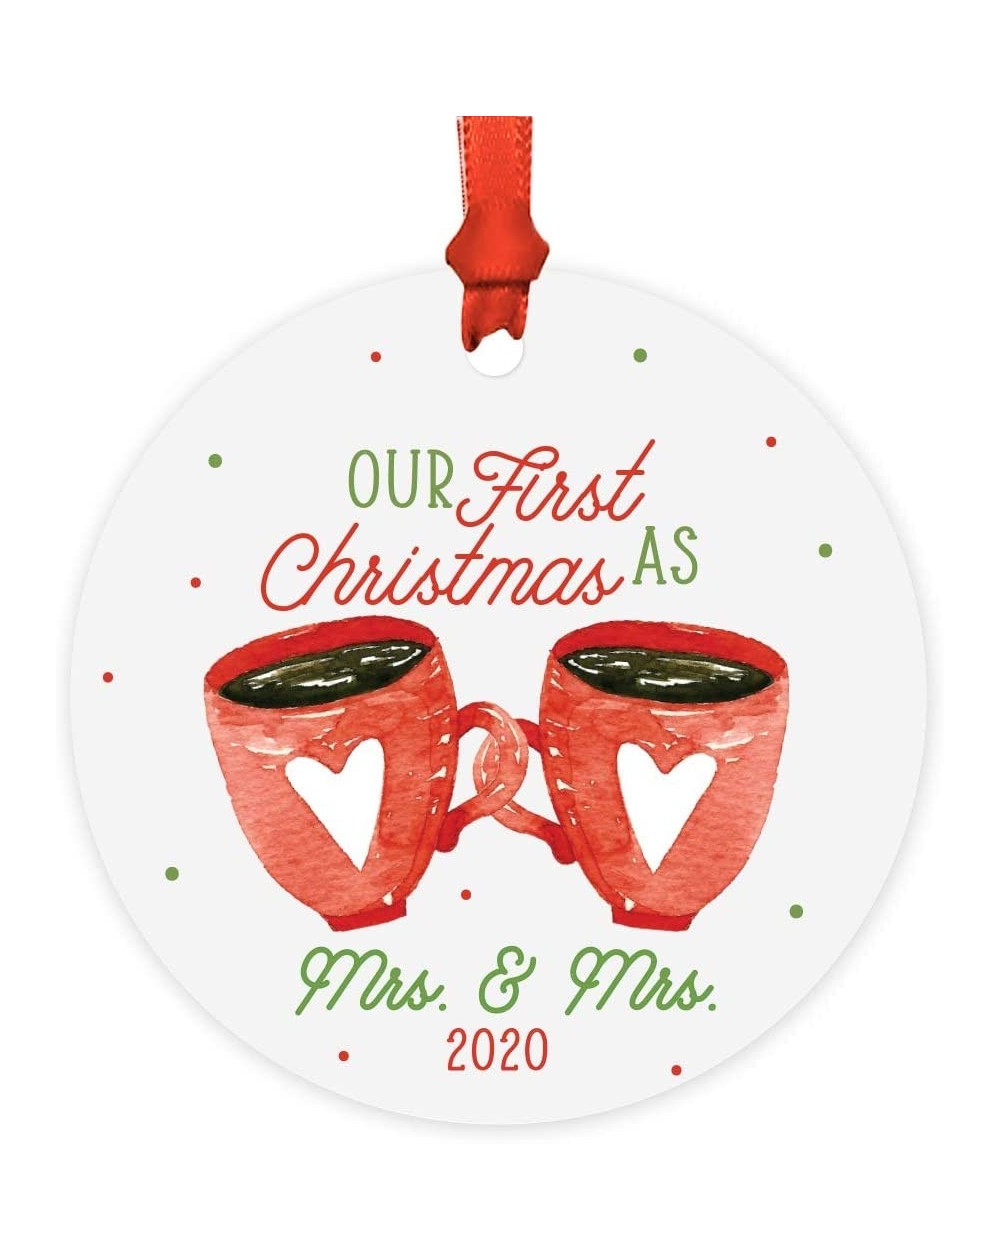 Ornaments Round Metal Christmas Tree Ornament Lesbian Couple's Wedding Gift- Our First Christmas as Mrs. & Mrs- Hot Cocoa Hea...